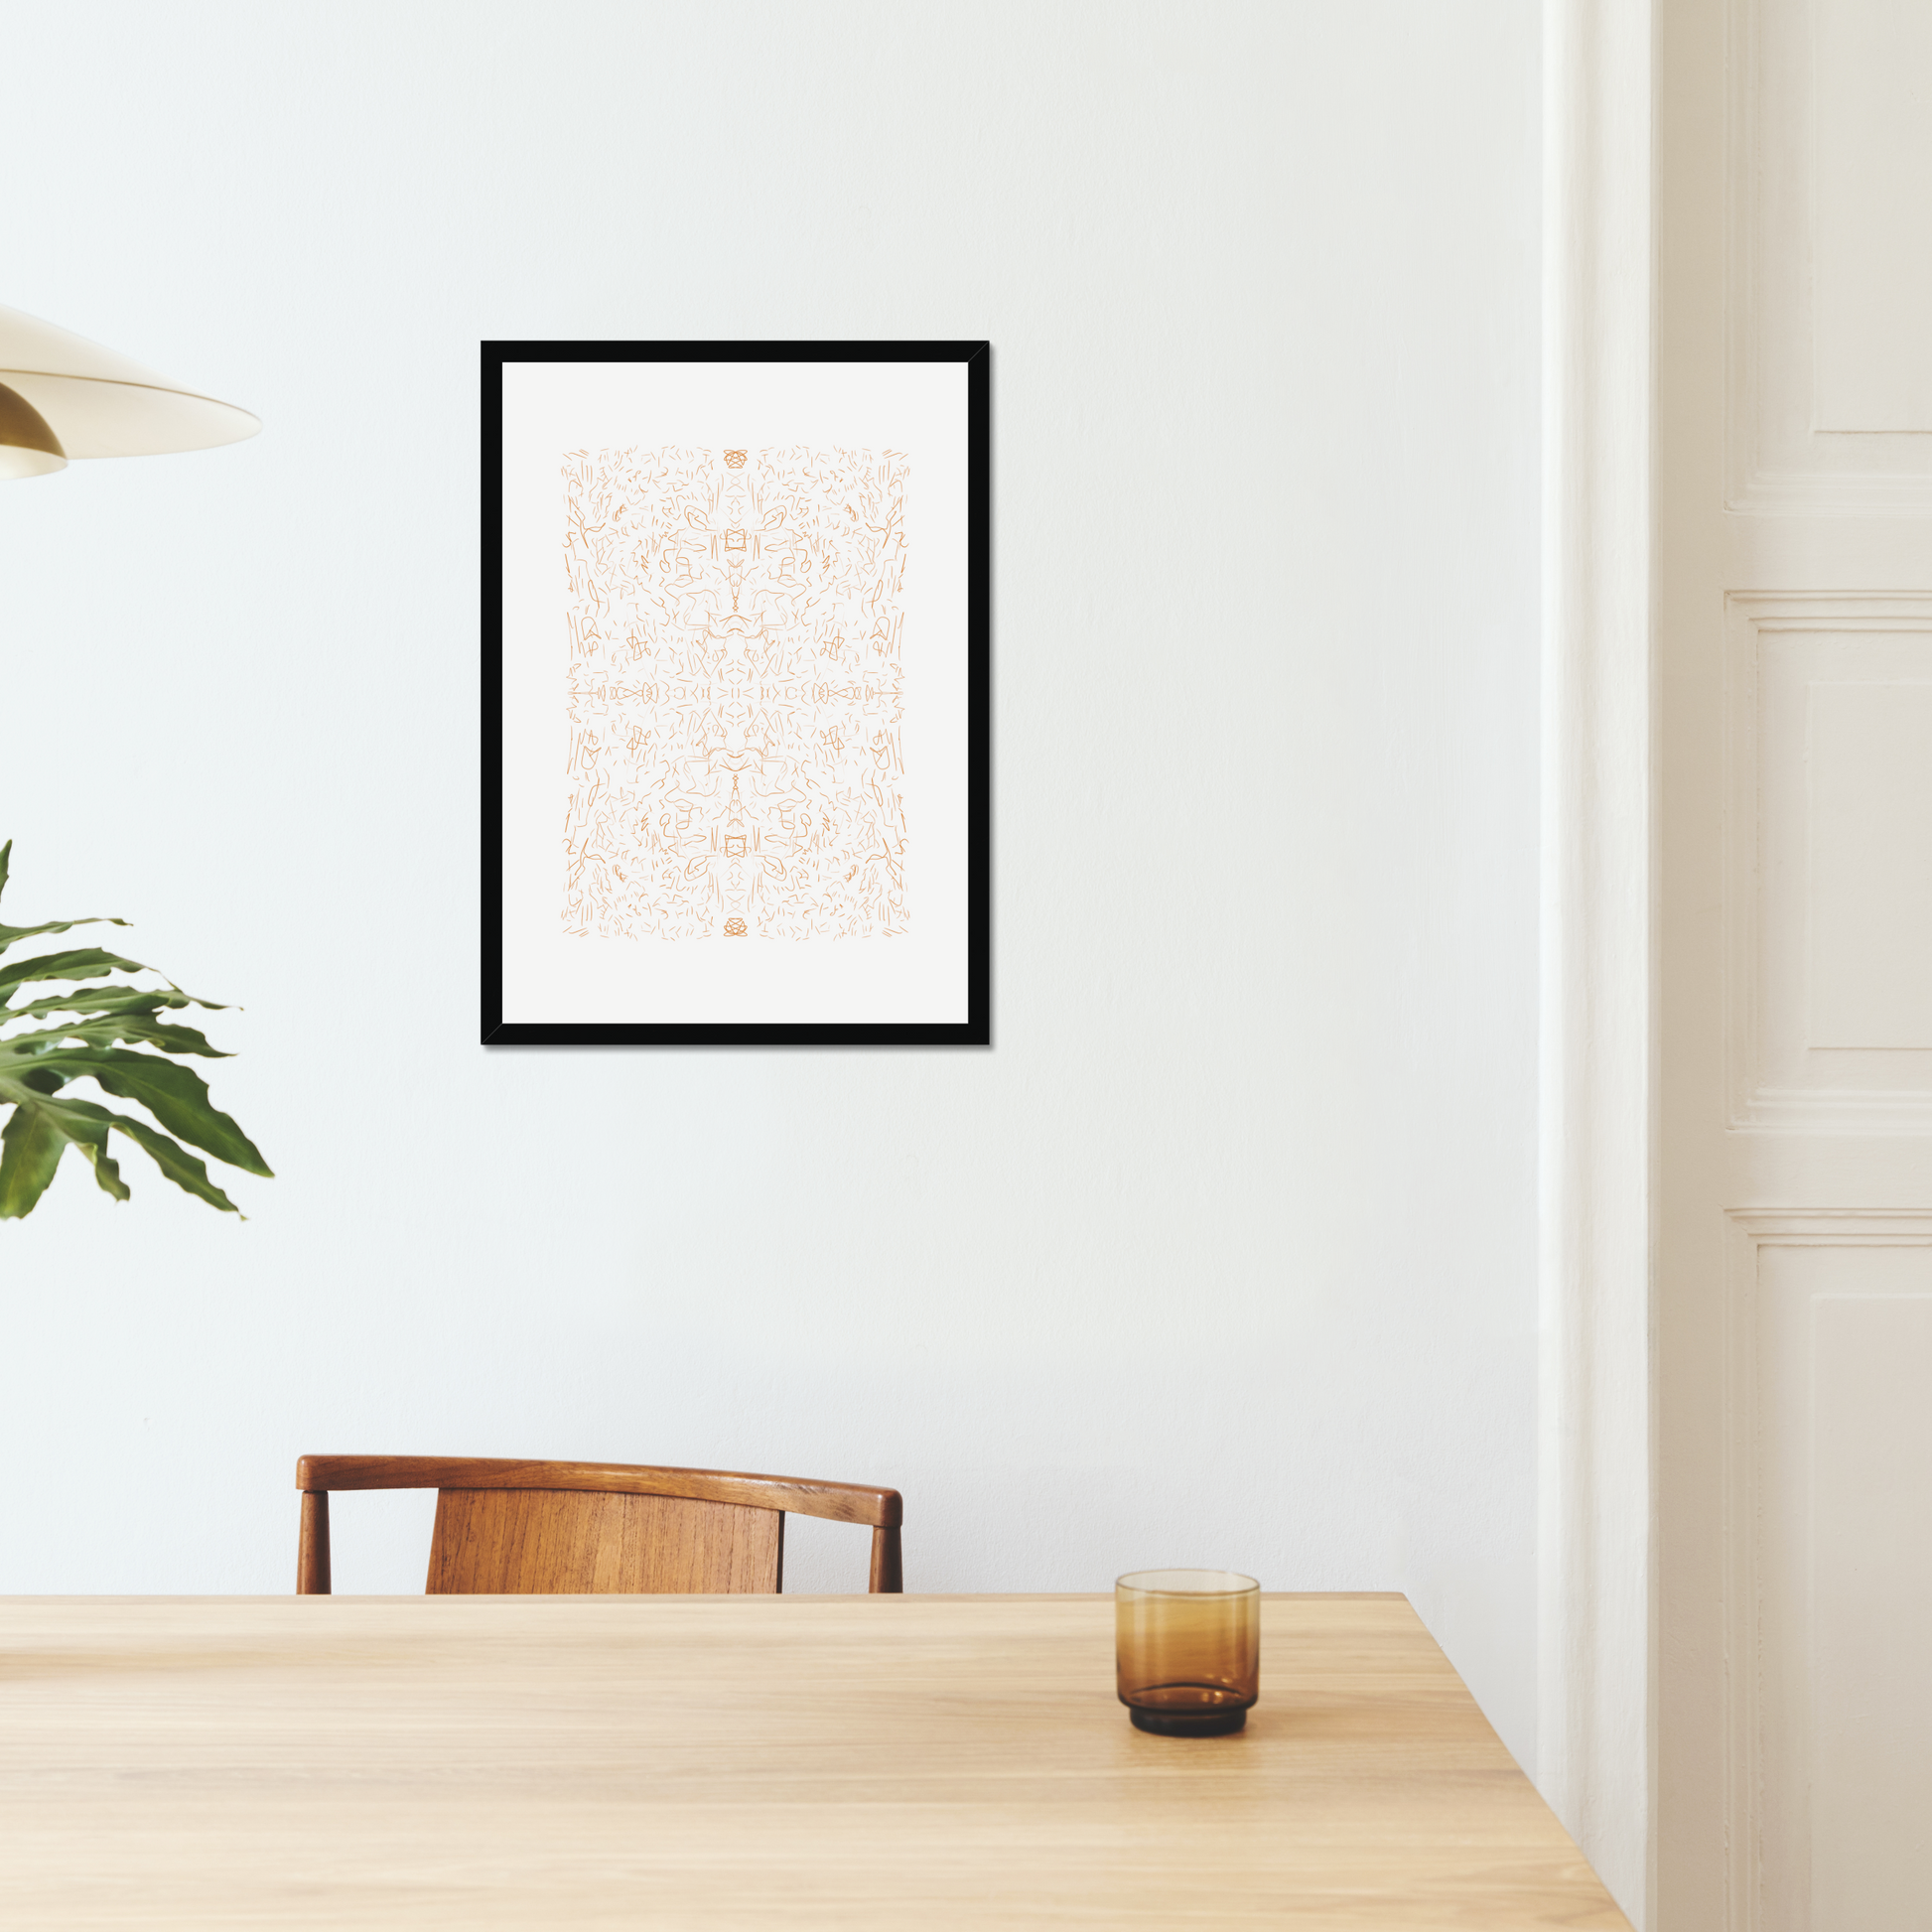 Looking for something different to add to your walls? Check out our Minimalist Kaleidoscope Fine Line Art Print! This print is full of boho vibes and would make a great addition to any room.